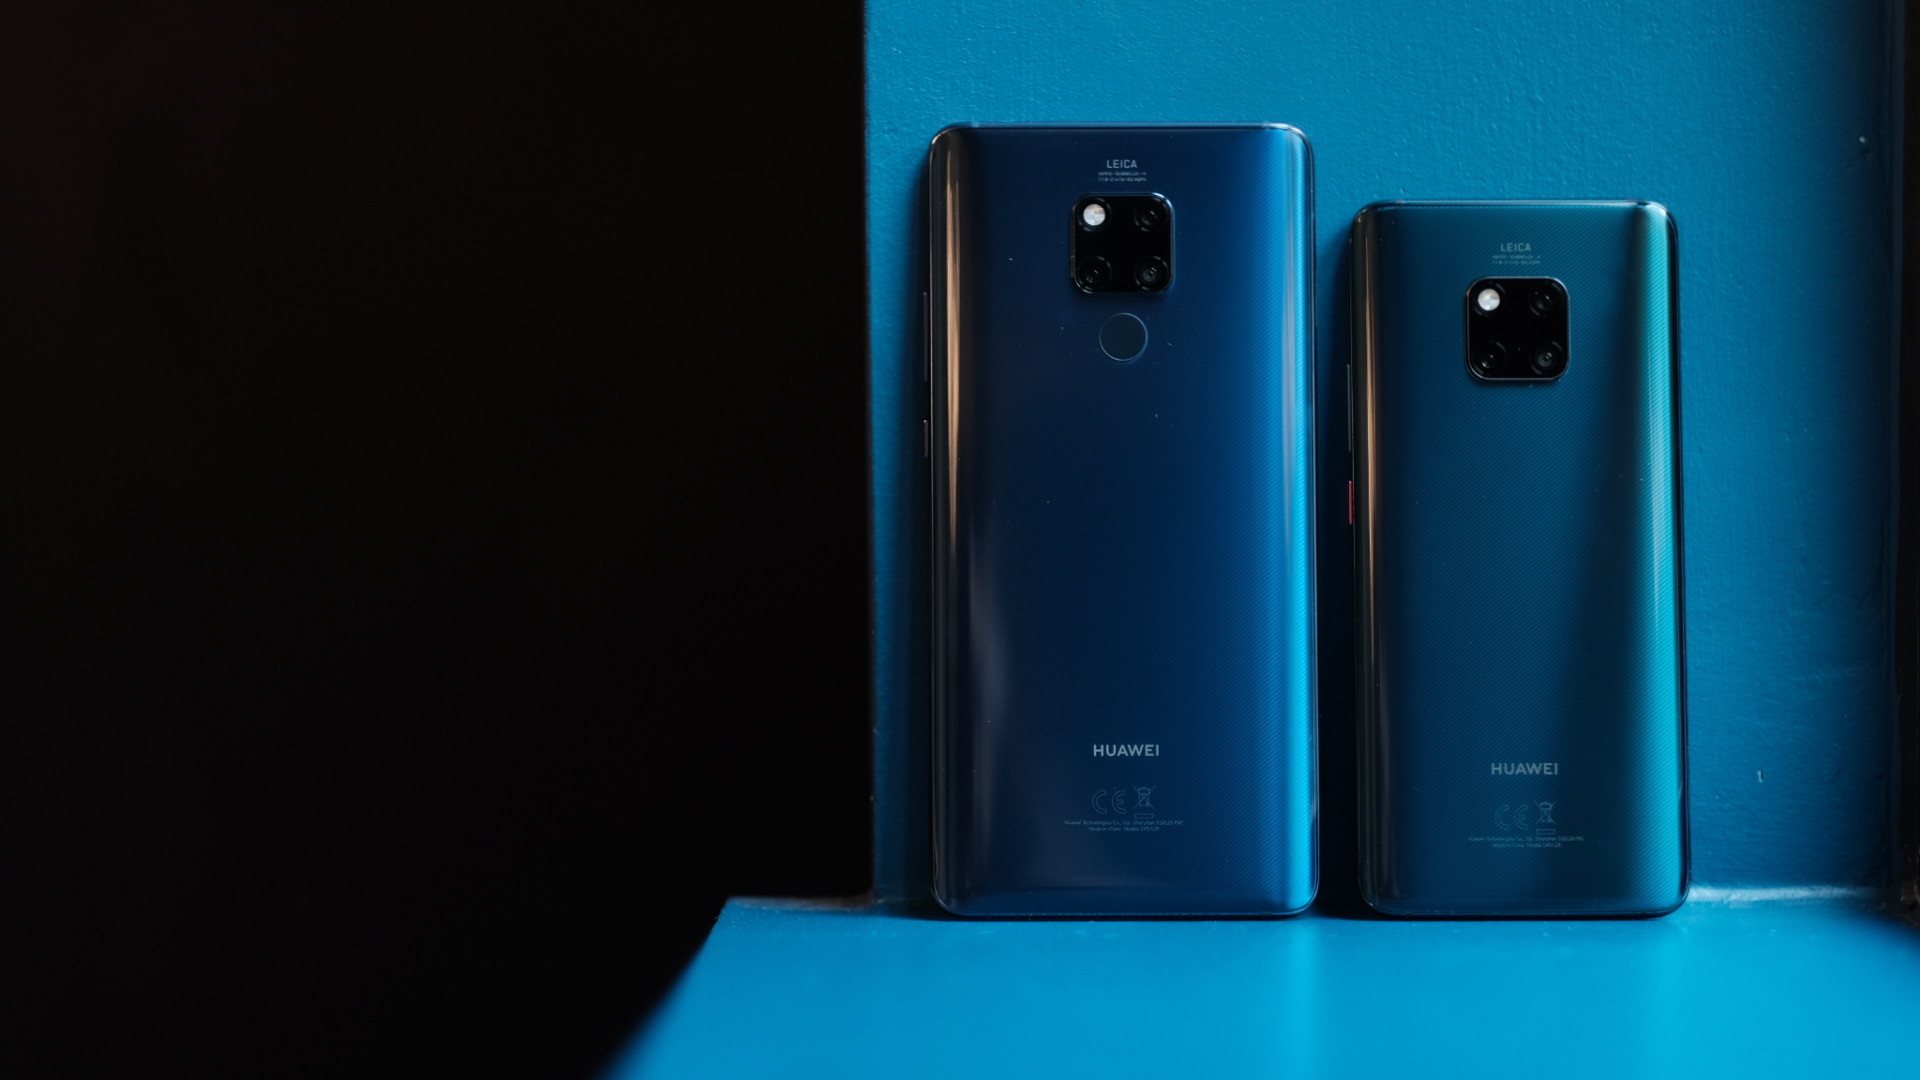 The HUAWEI Mate 20 X and the Mate 20 Pro.